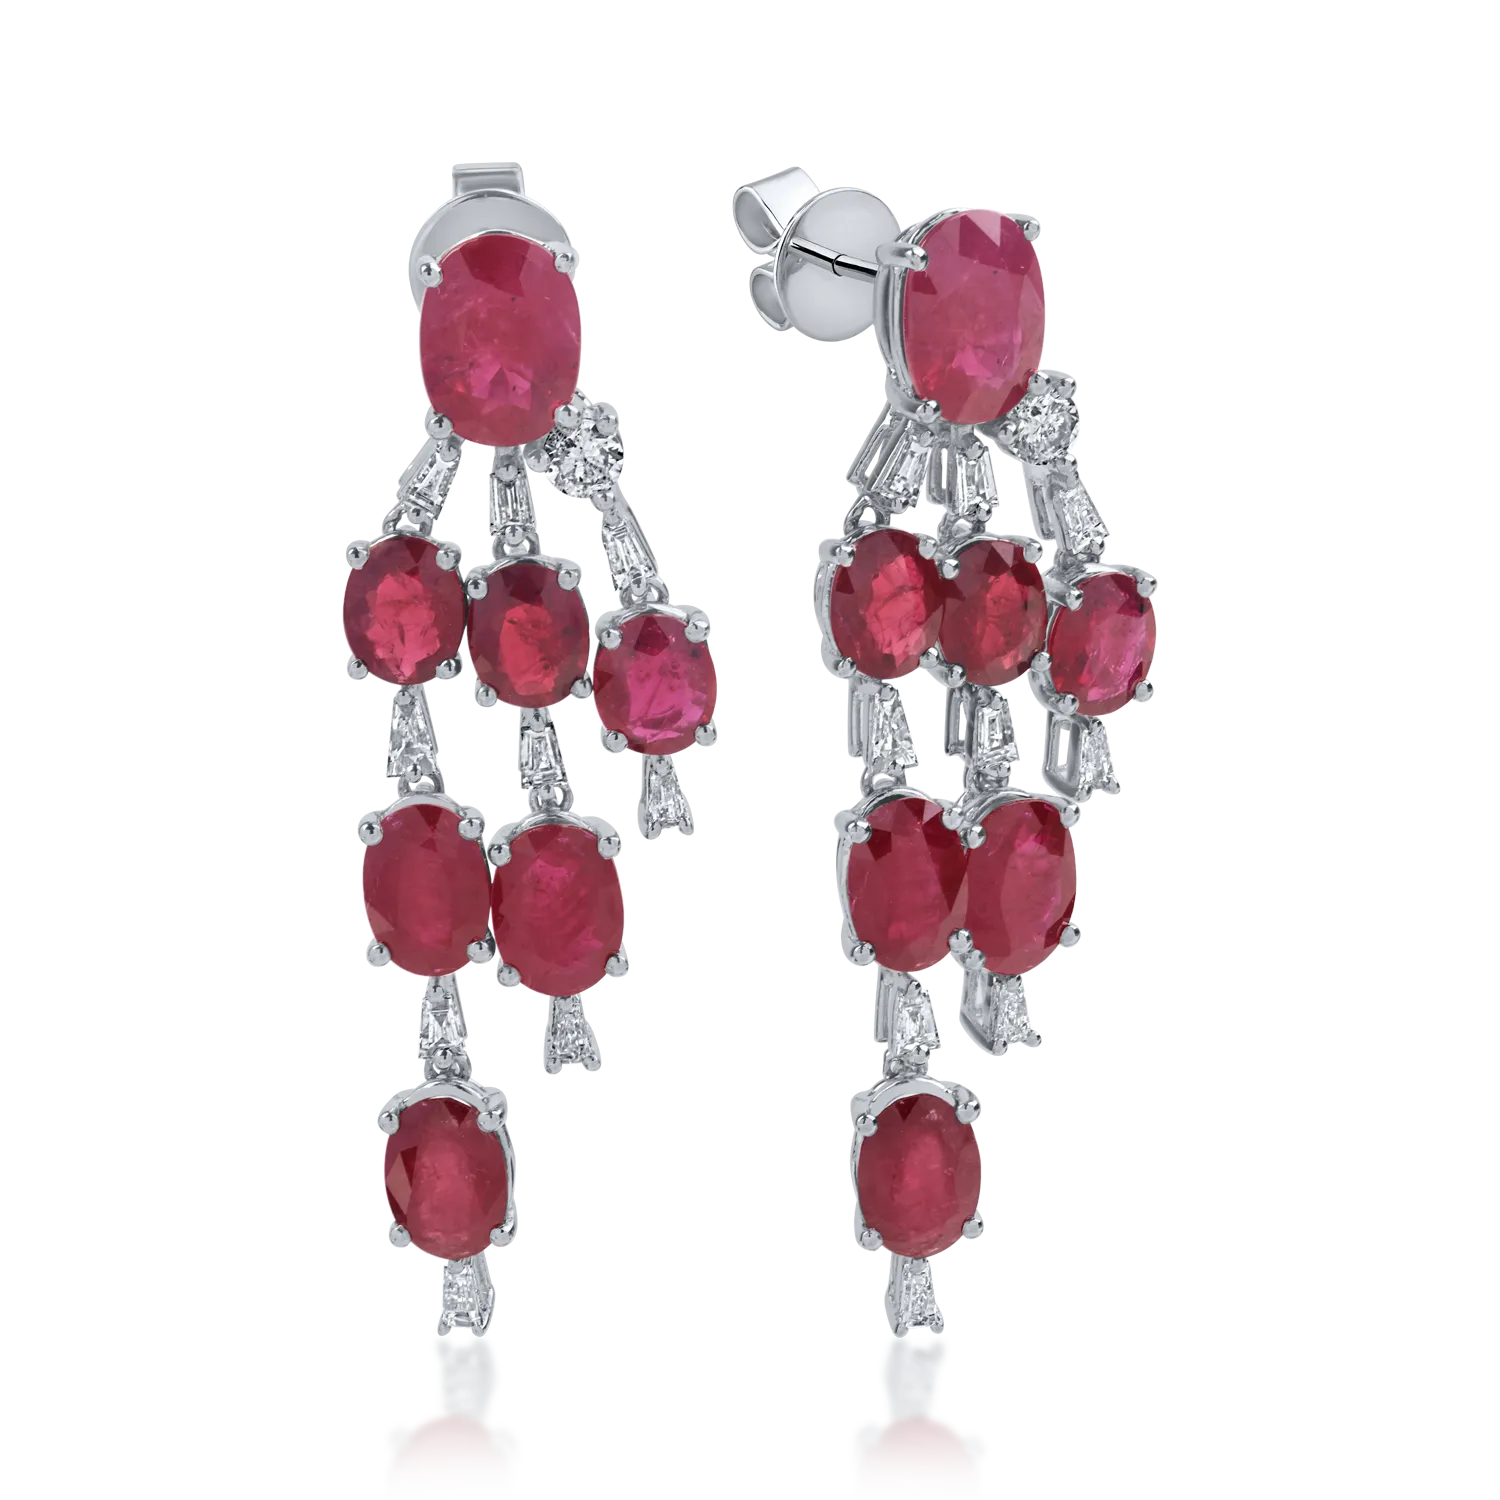 White gold earrings with 7.48ct rubies and 0.52ct diamonds